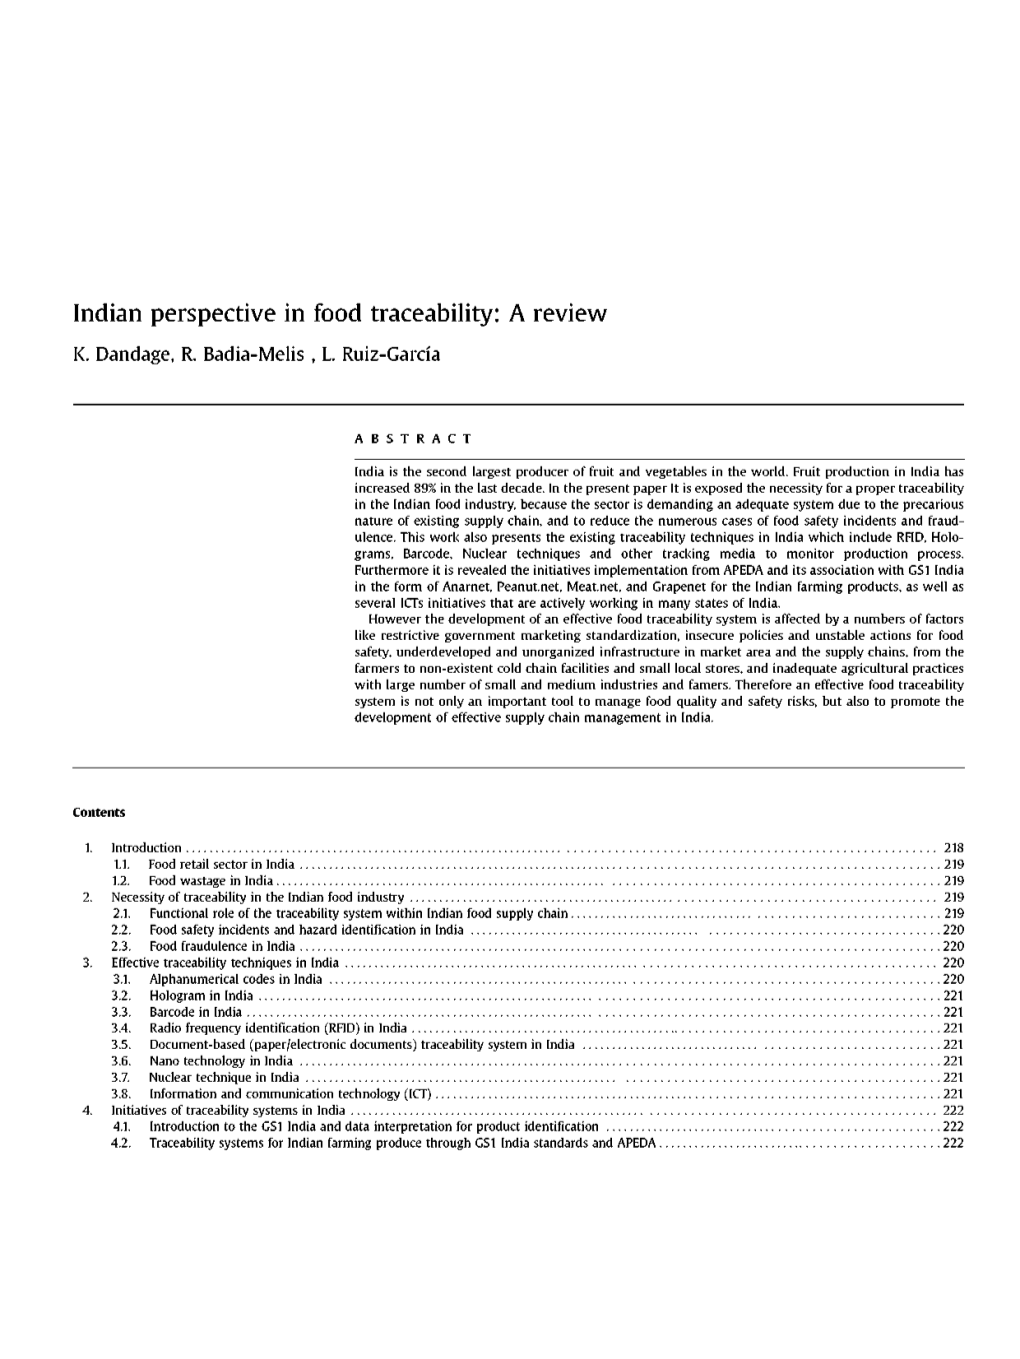 Indian Perspective in Food Traceability: a Review K